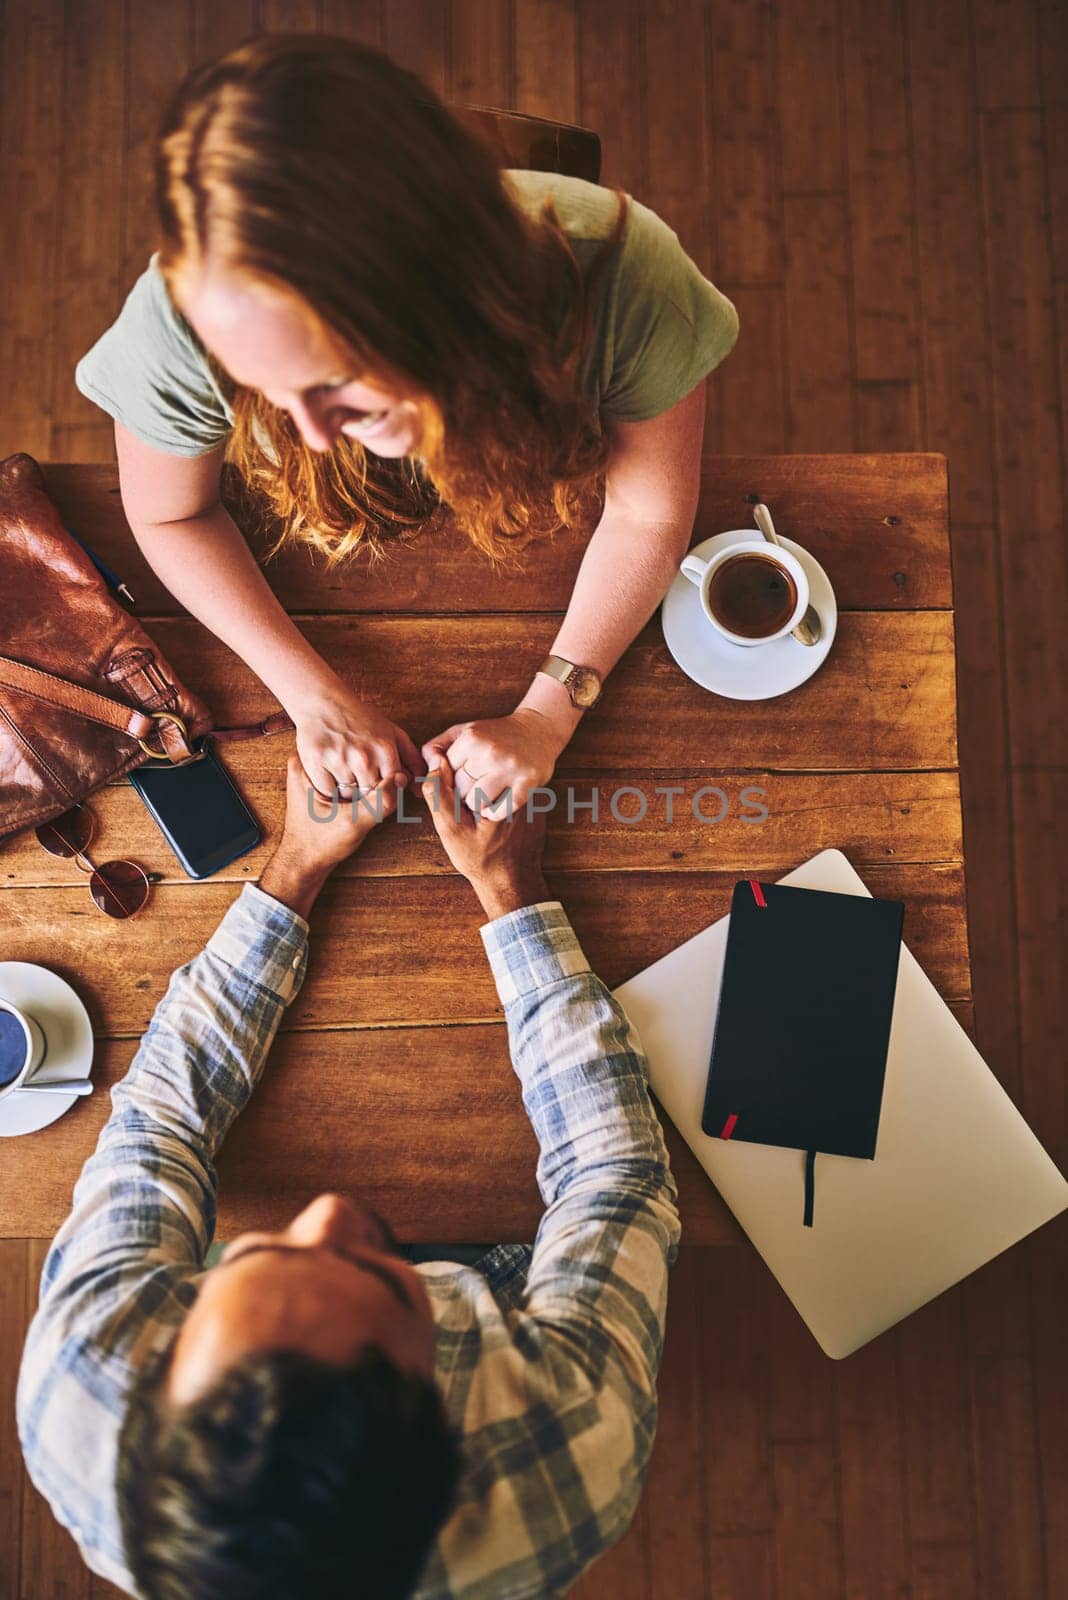 Above, couple and coffee shop with holding hands, love and conversation for romance at table. Man, woman and valentines date in cafe for support, bonding and talking with happiness, care and trust.